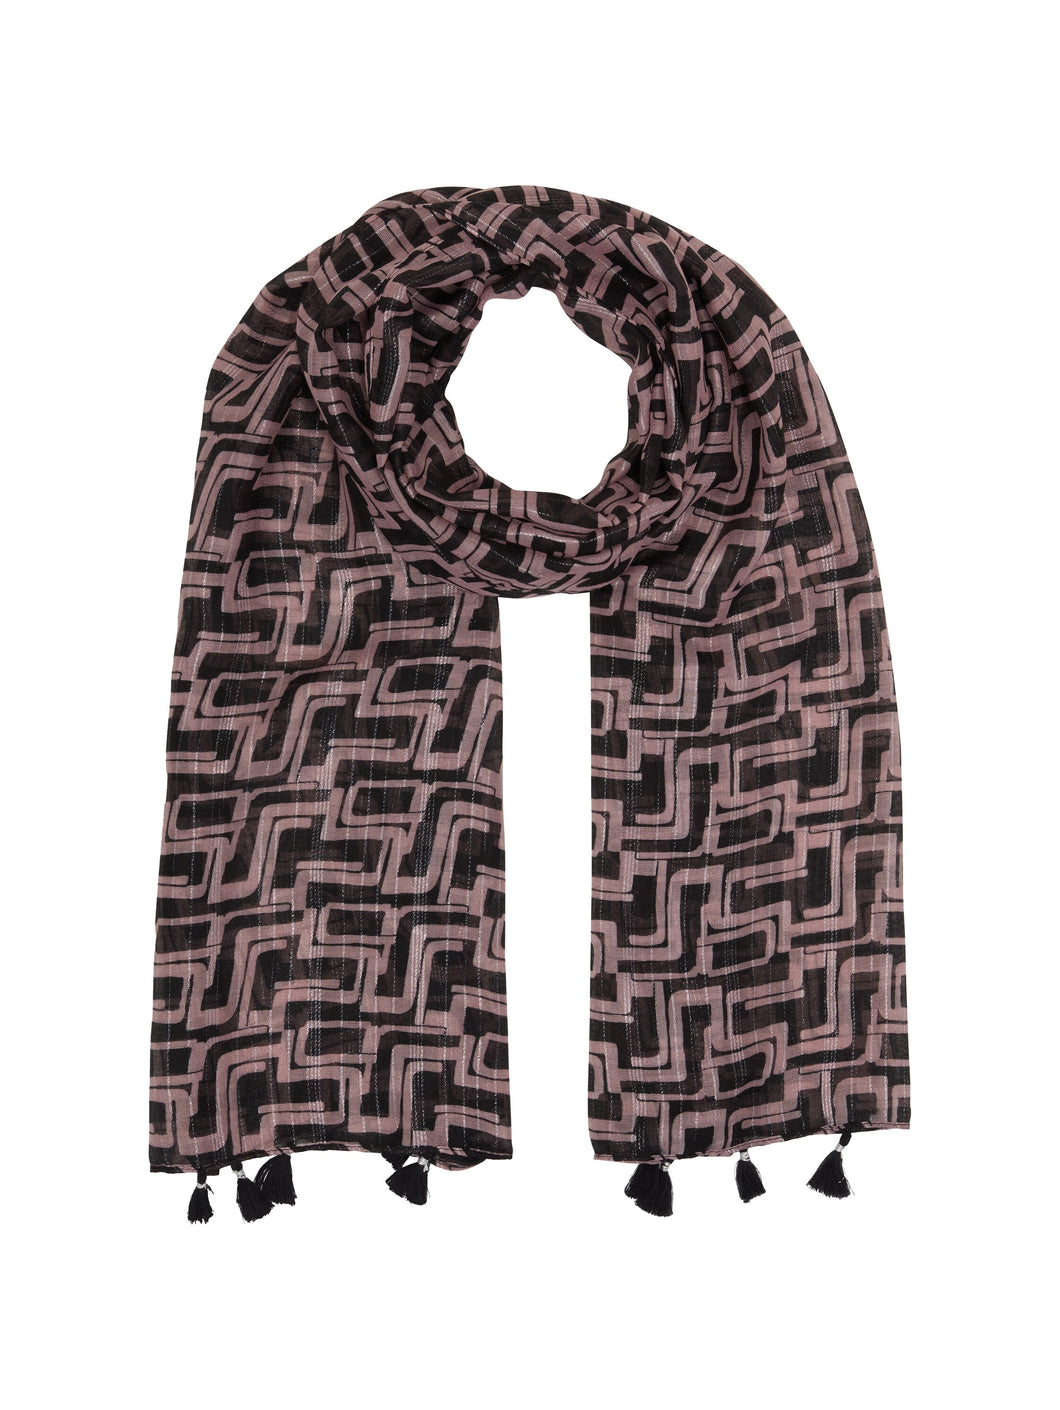 TOM TAILOR PRINTED SCARF WITH LUREX black lilac abstract design